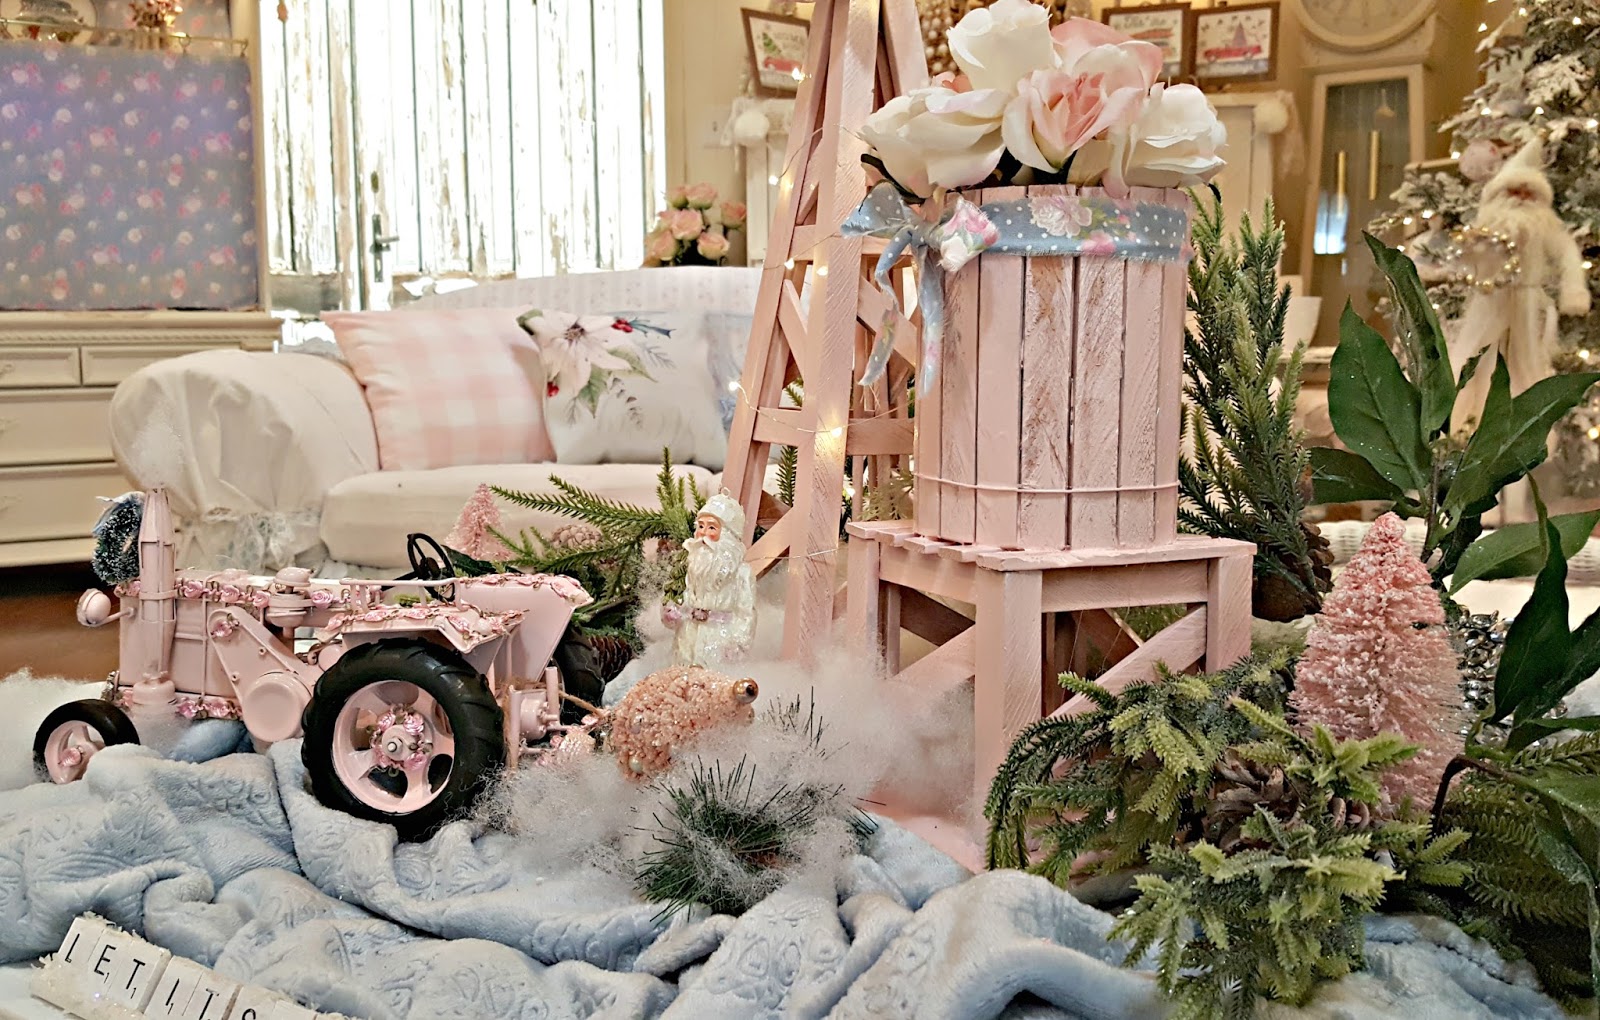 Penny's Vintage Home: Is That a Pink Tractor on the Coffee Table